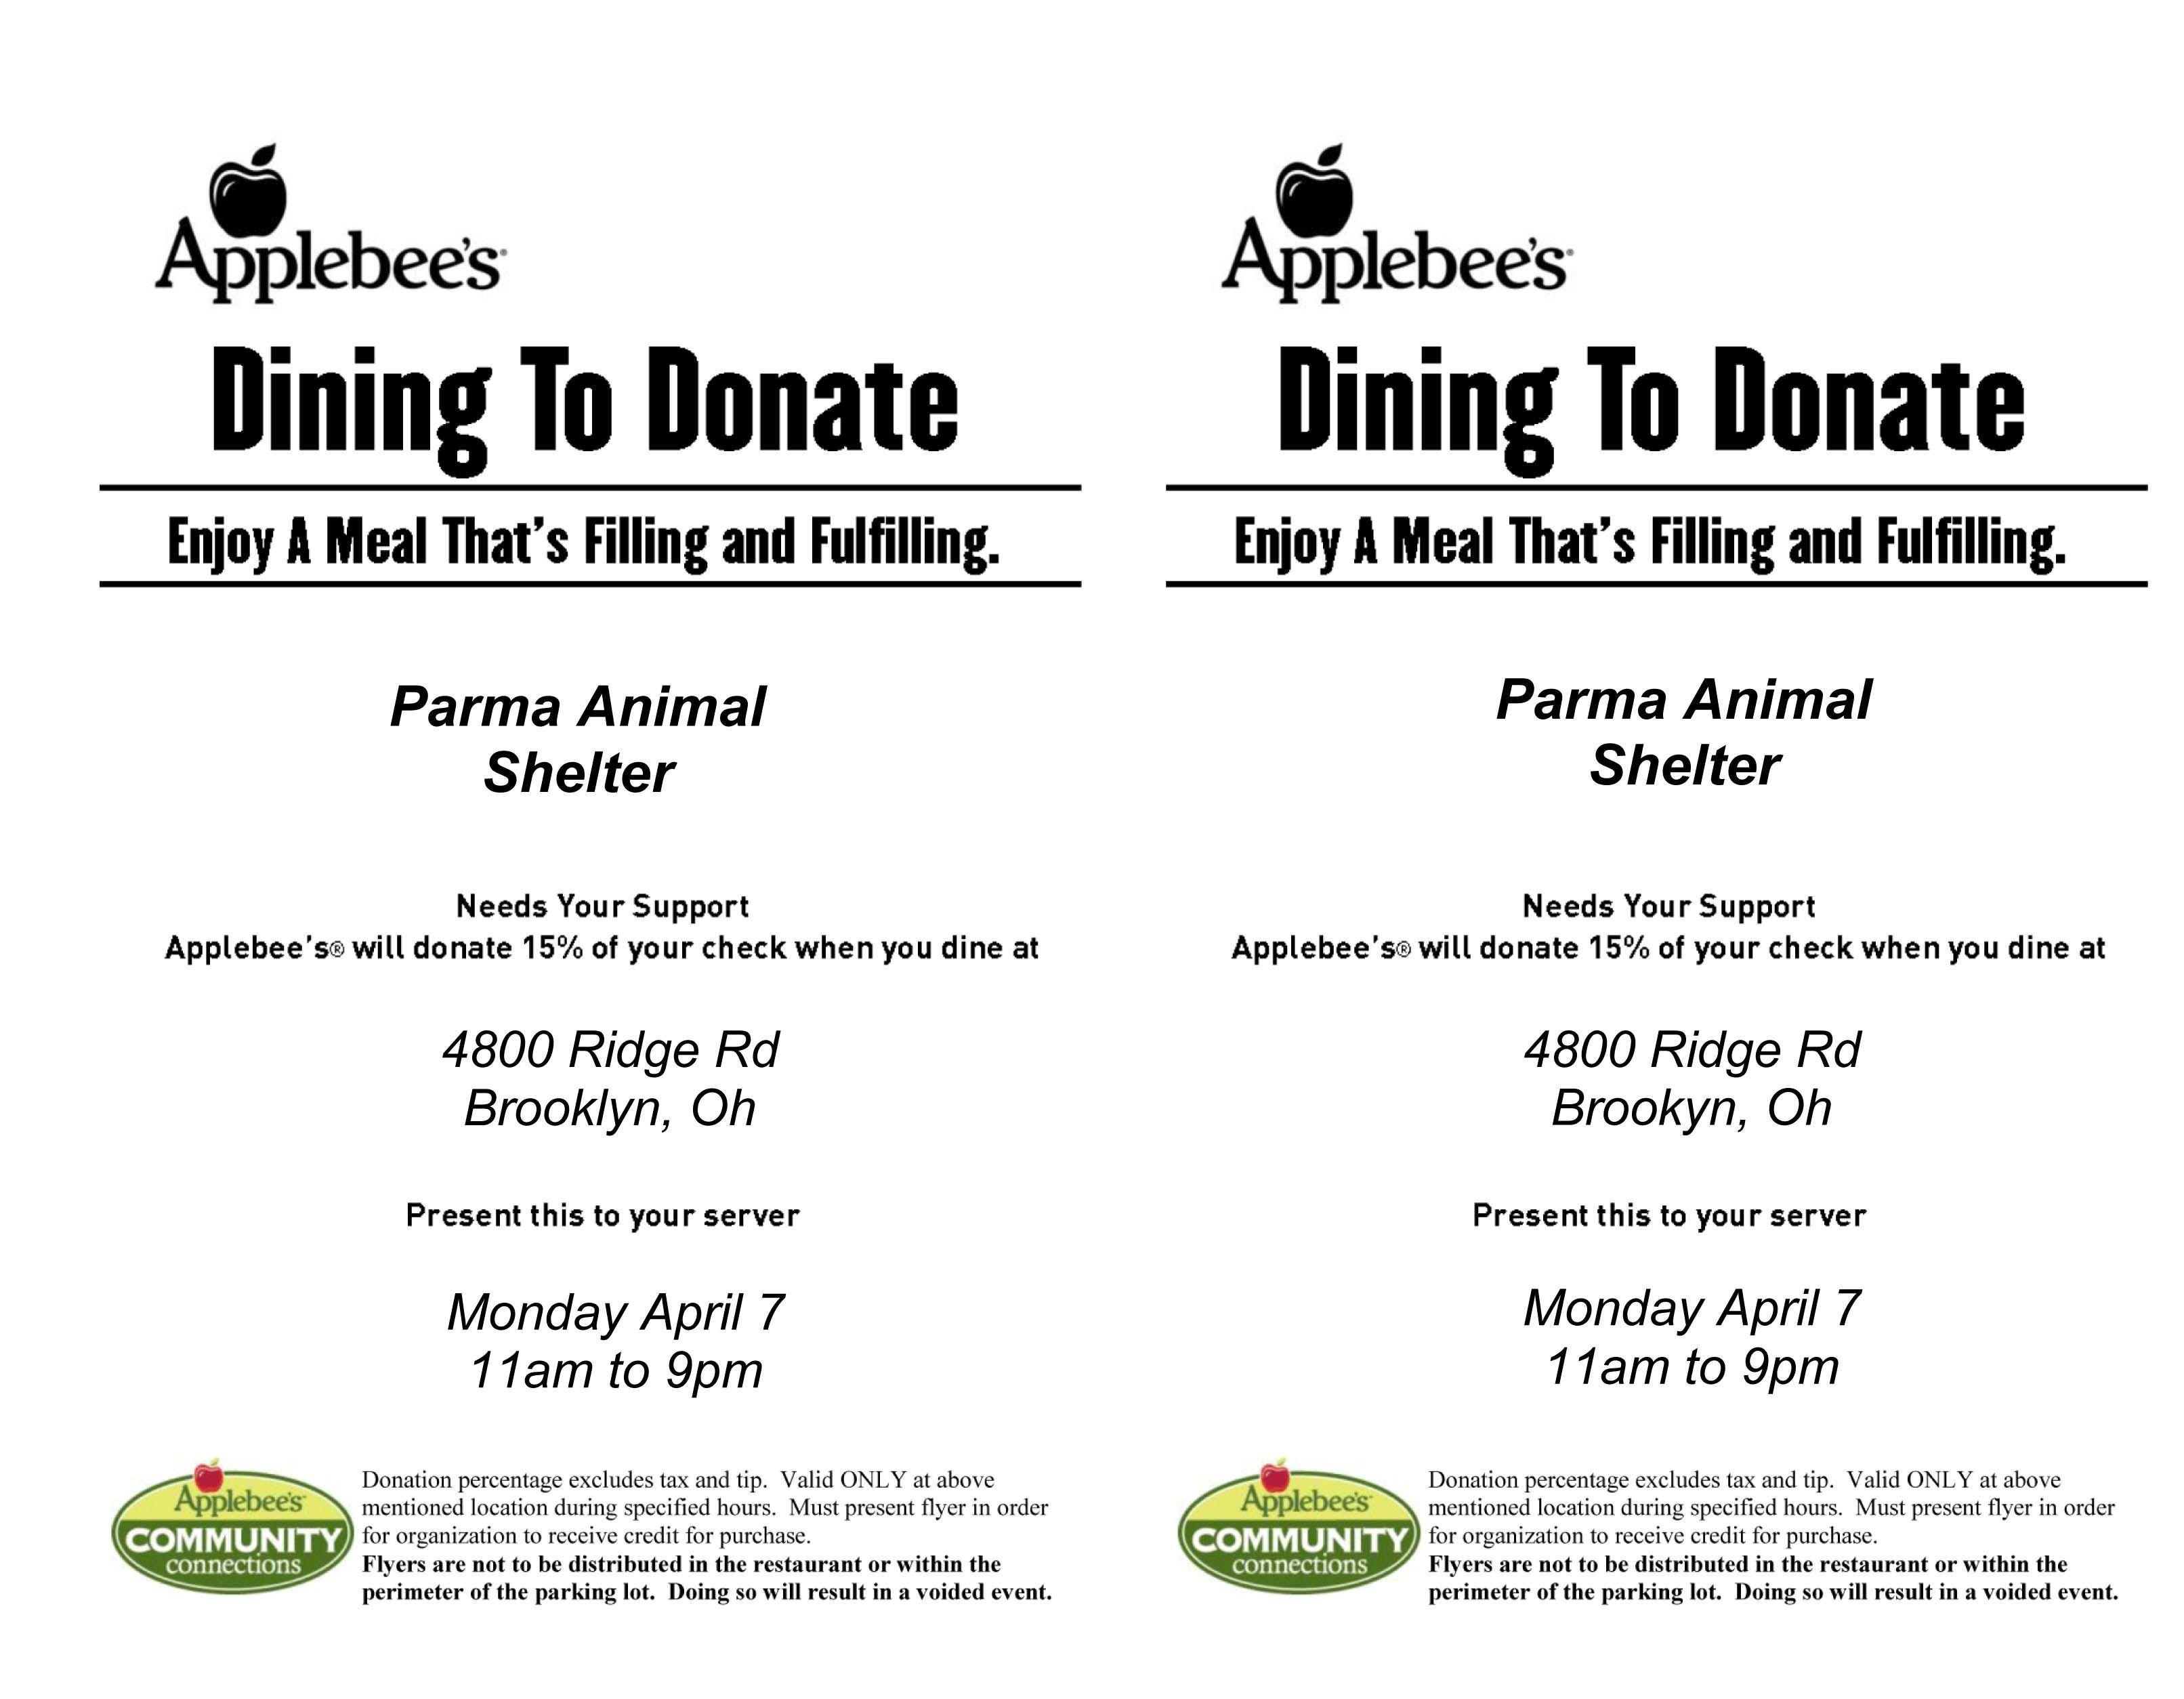 Applebee's Community Connections Logo - YUMMY IN YOUR TUMMY* April 7th Applebee's Dining to Donate